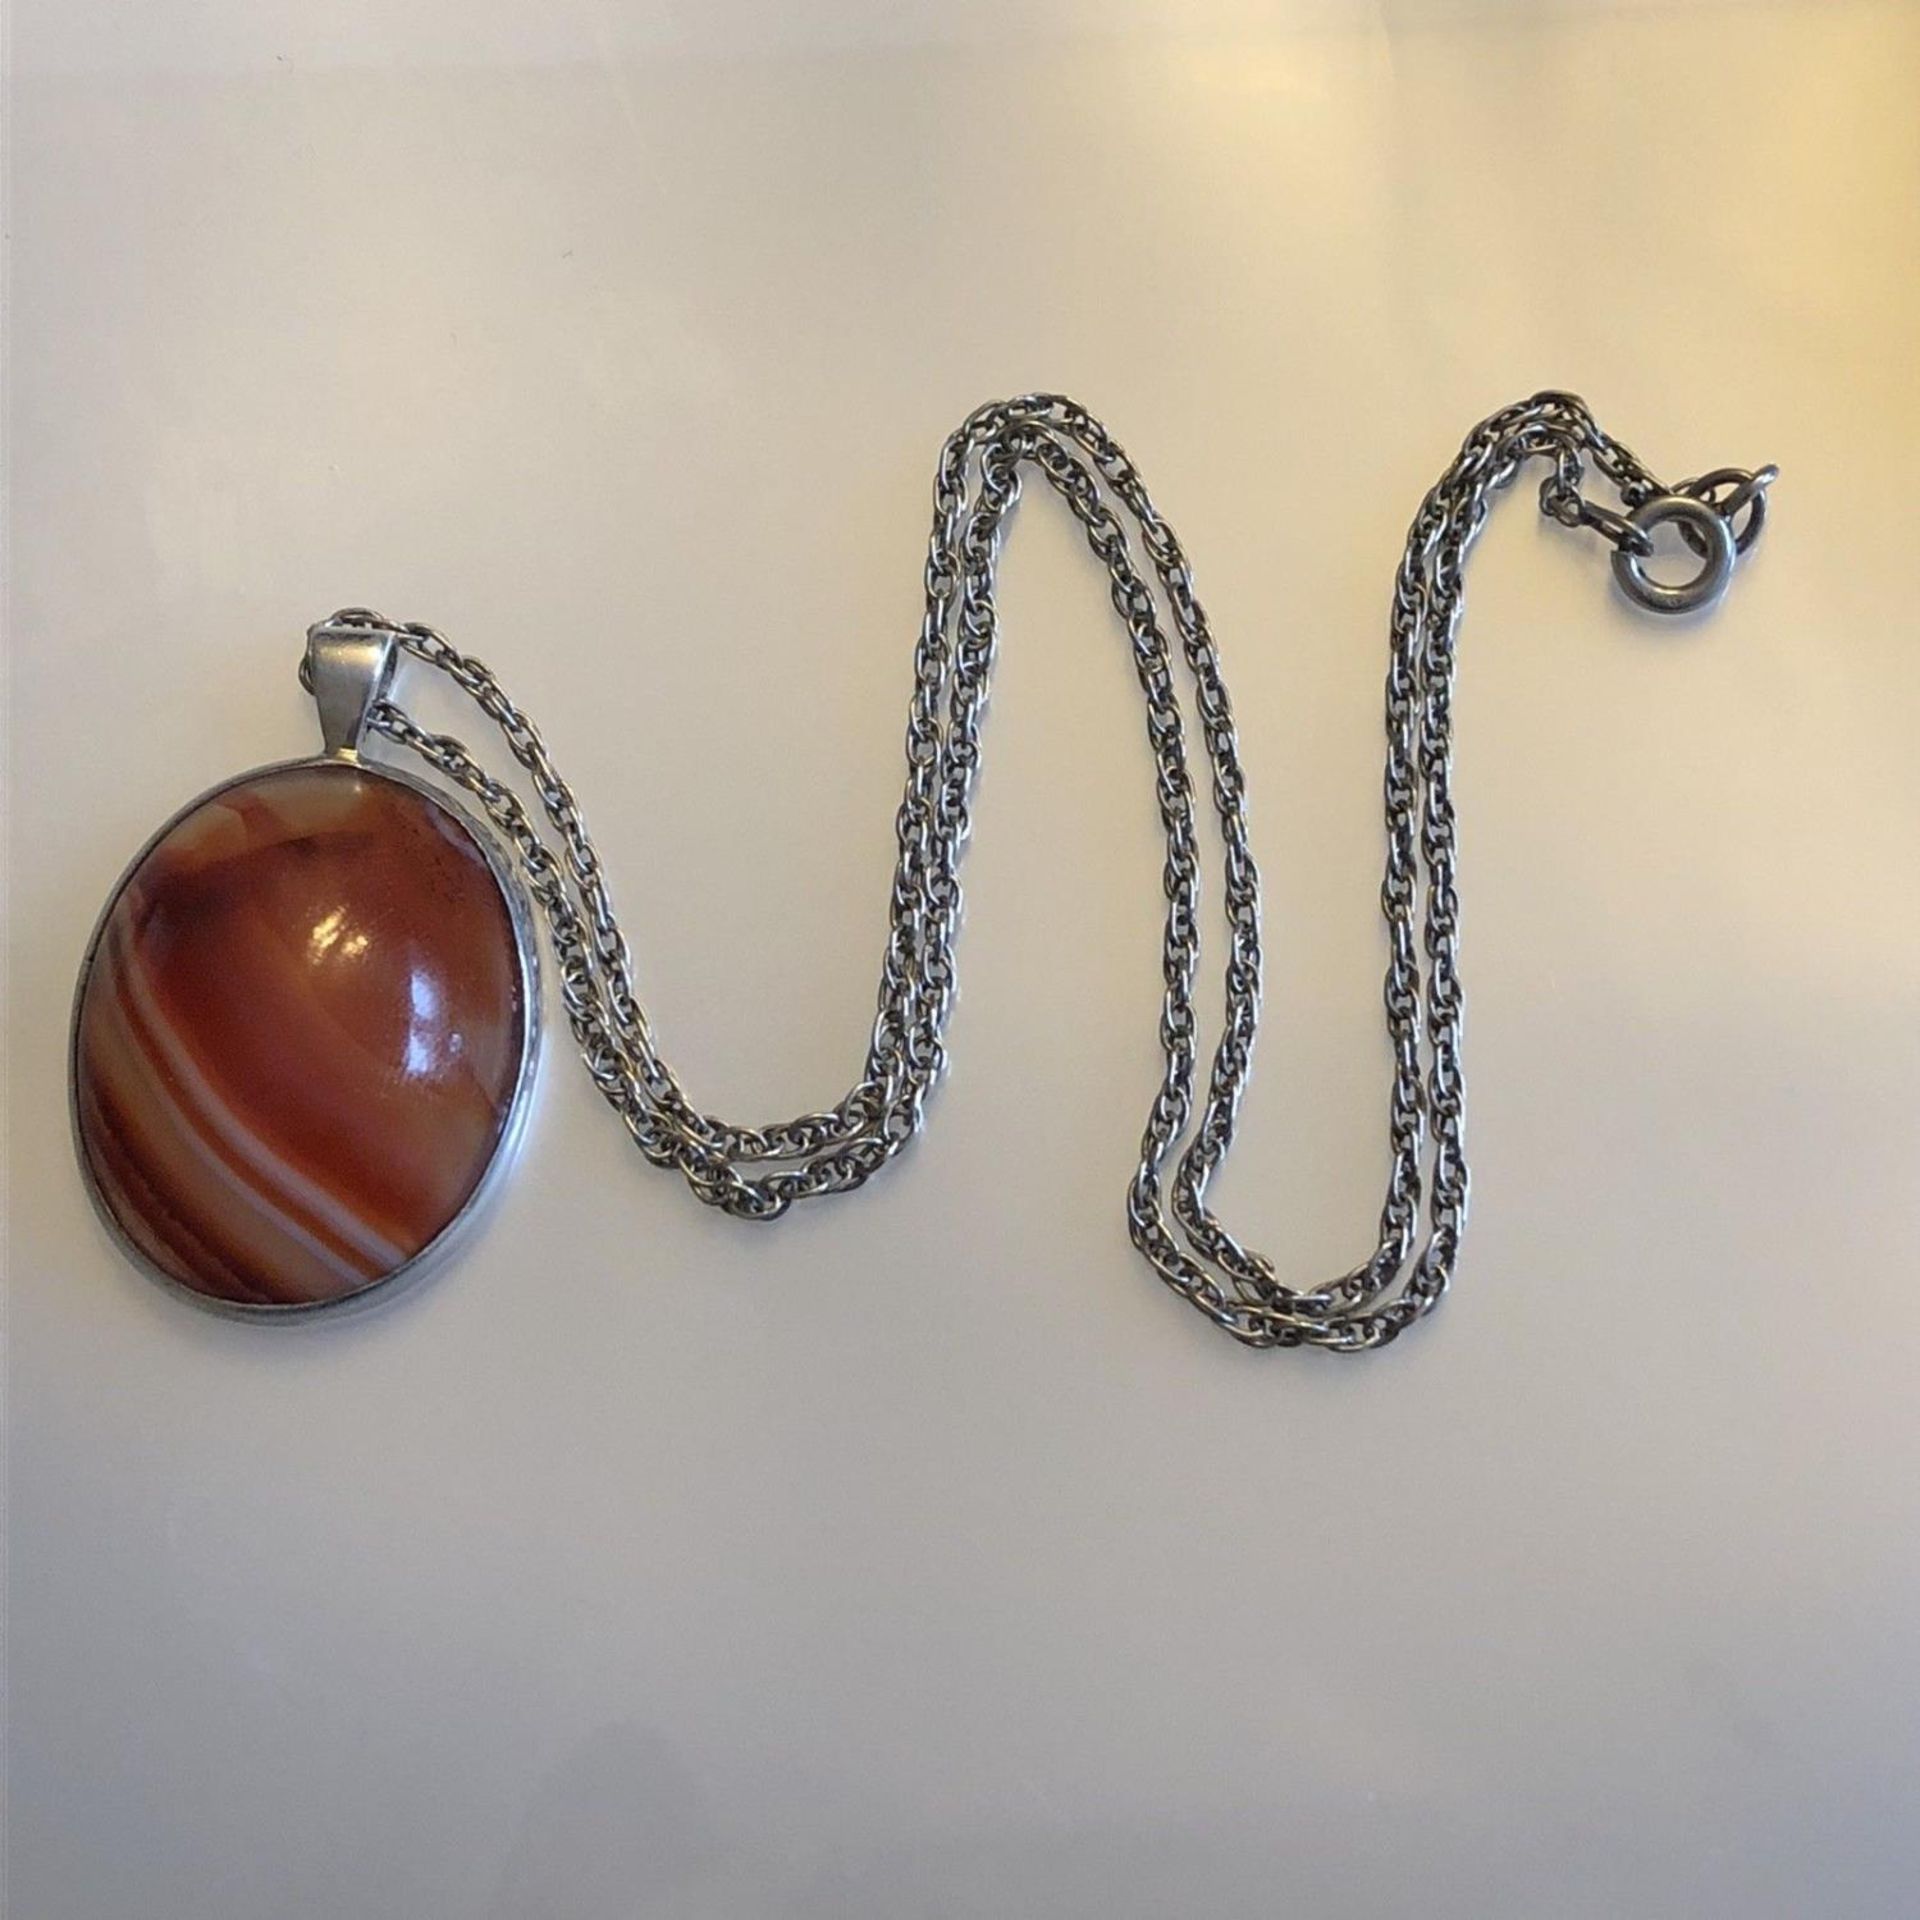 Banded Orange Carnelian Stone Pendant on 925 Sterling Silver Chain Necklace